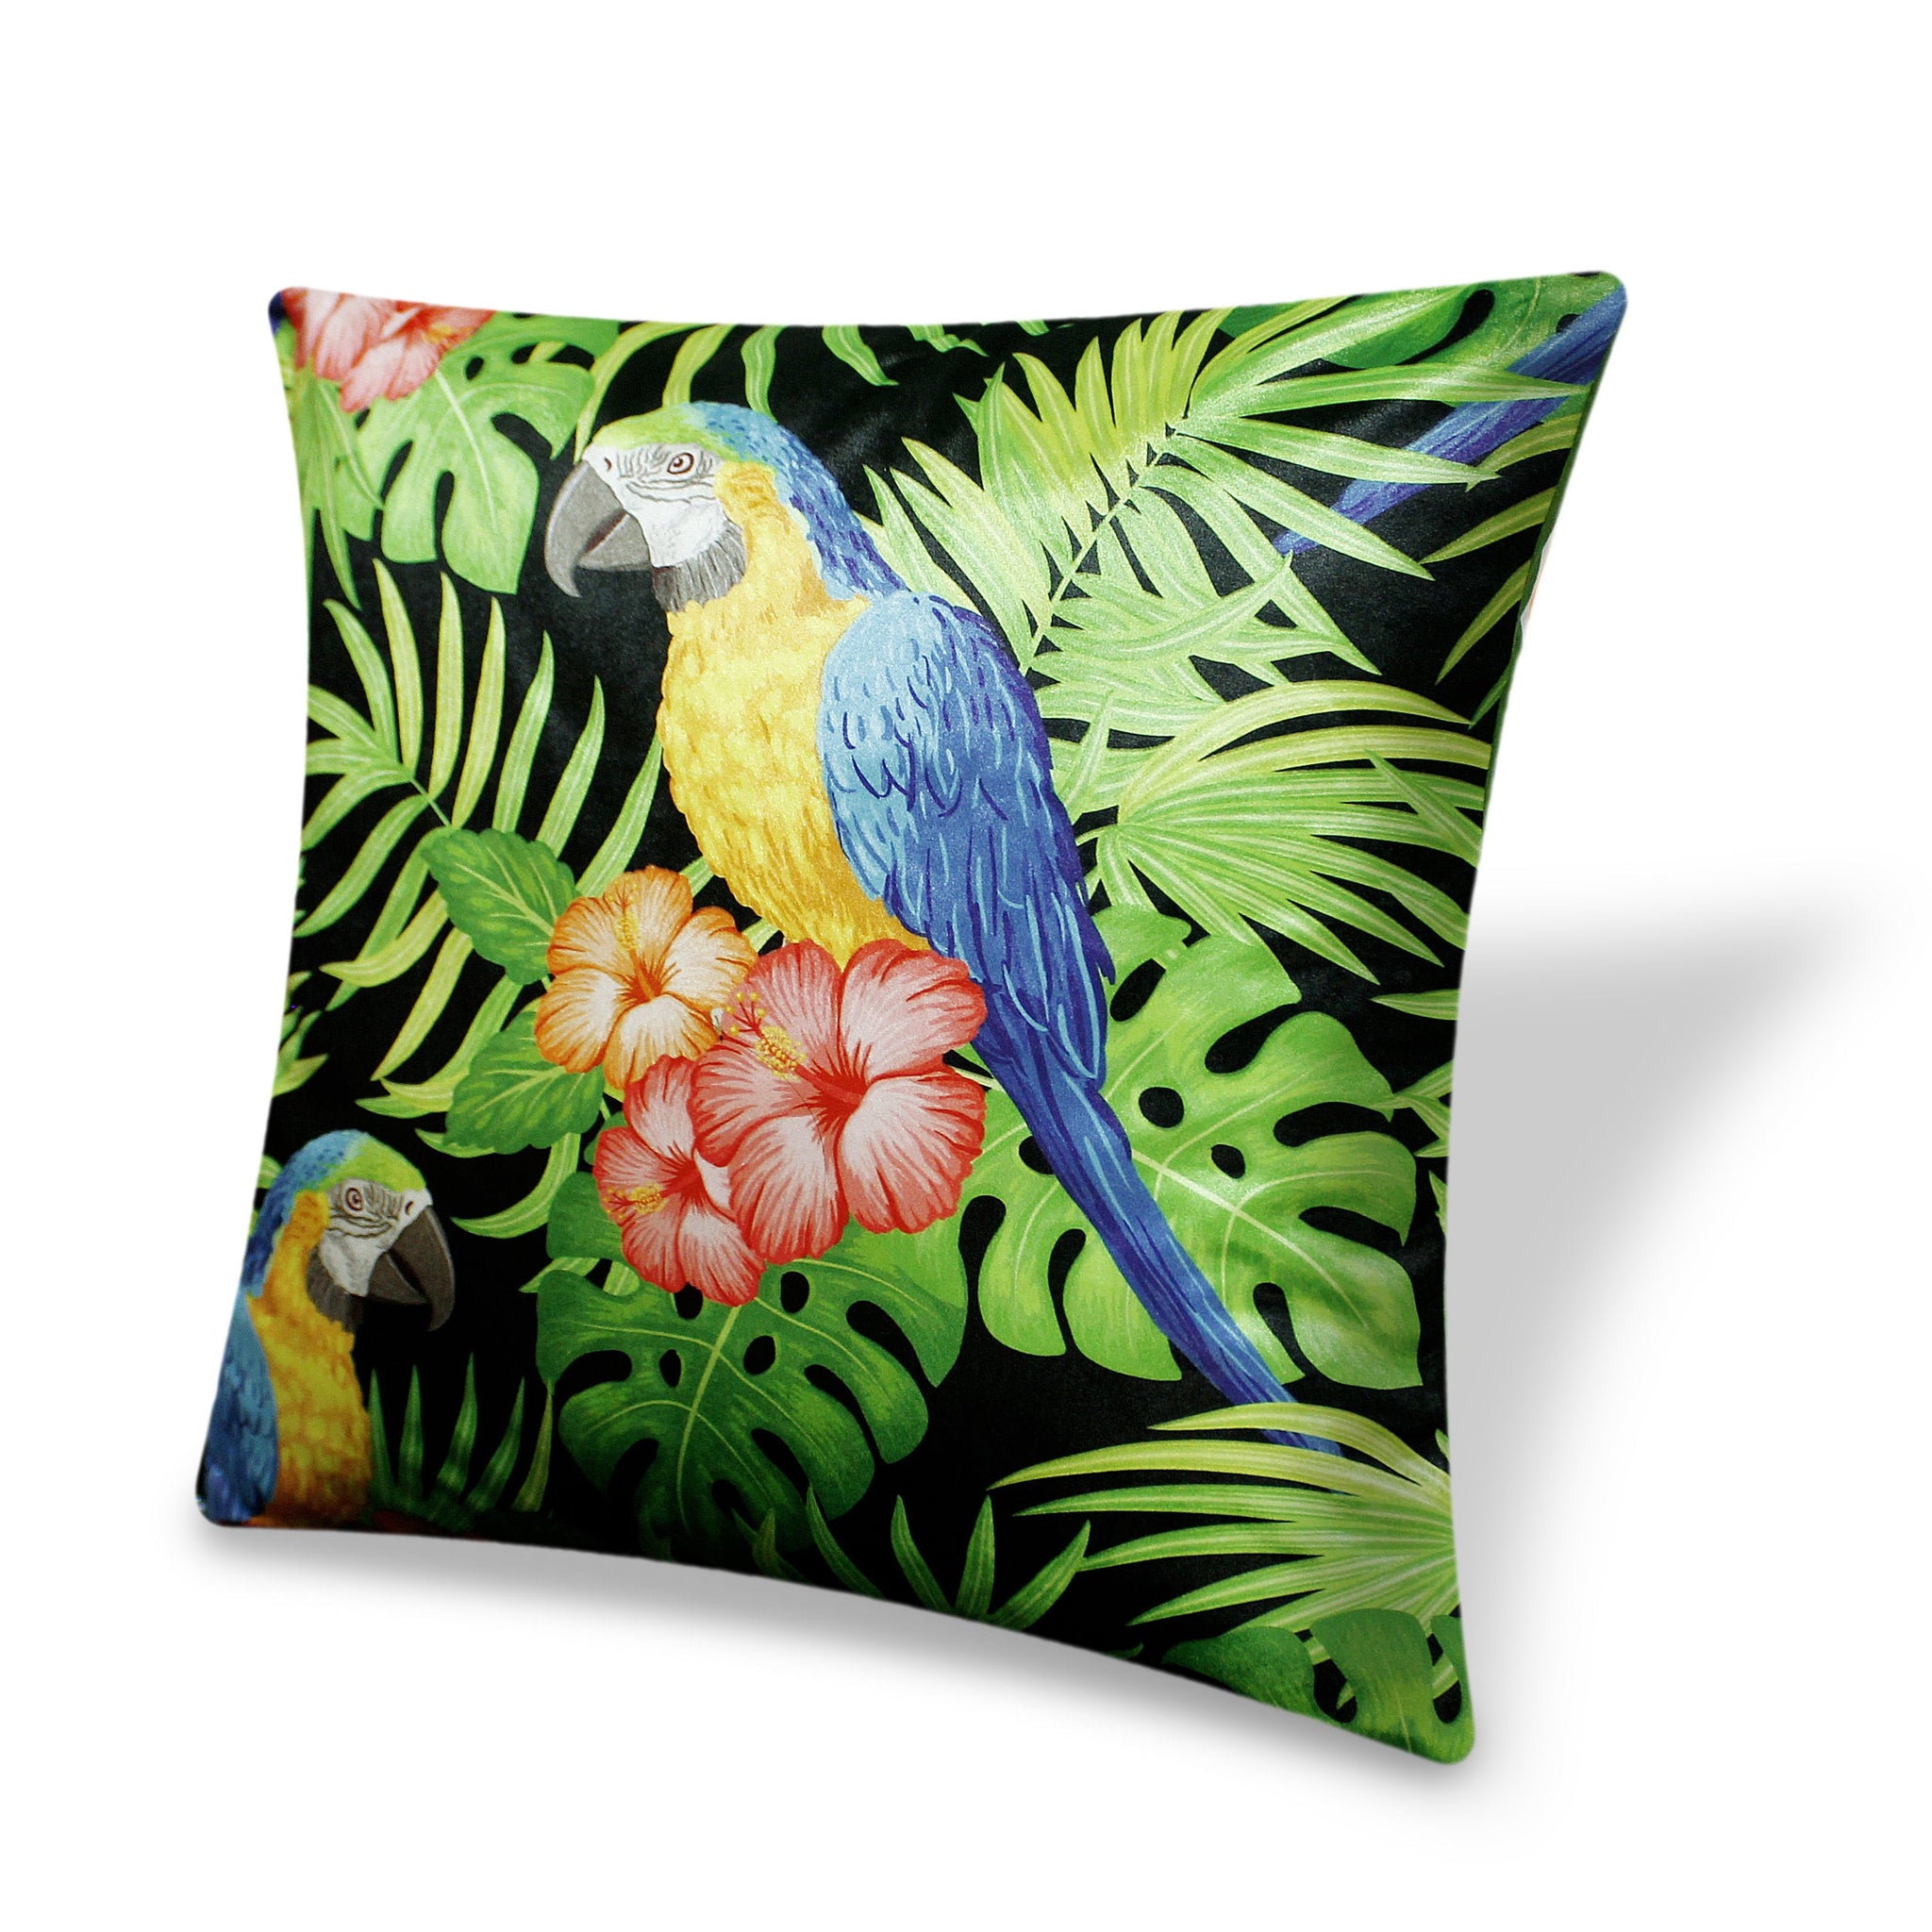 Green Velvet Cushion Cover Parrot and Jungle Decorative Pillowcase Home Decor Throw Pillow for Sofa Chair Living Room 45x45 cm 18x18 In